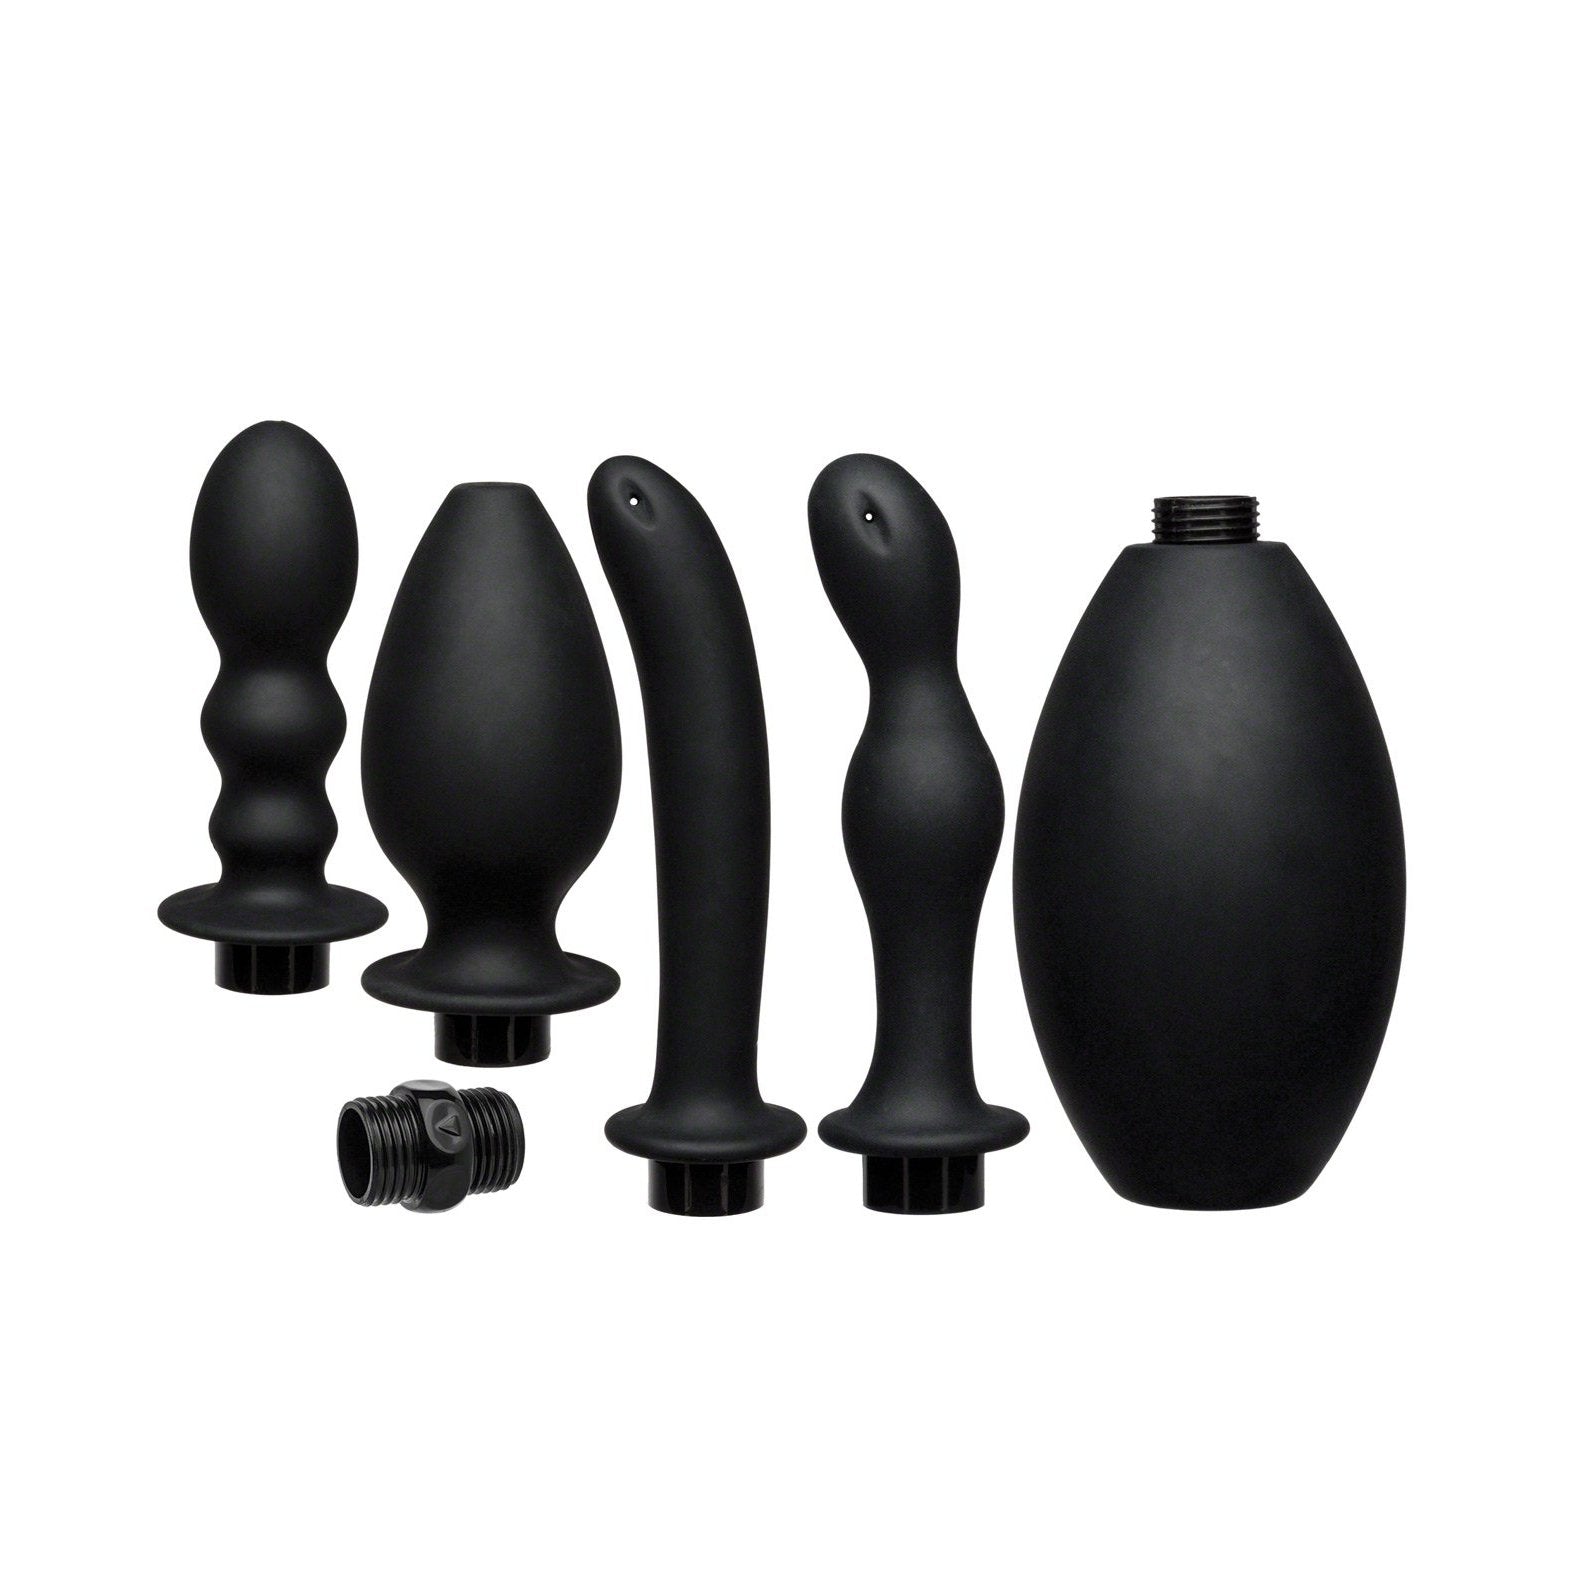 Kink Flow Flush Silicone Anal Douche & Accessories